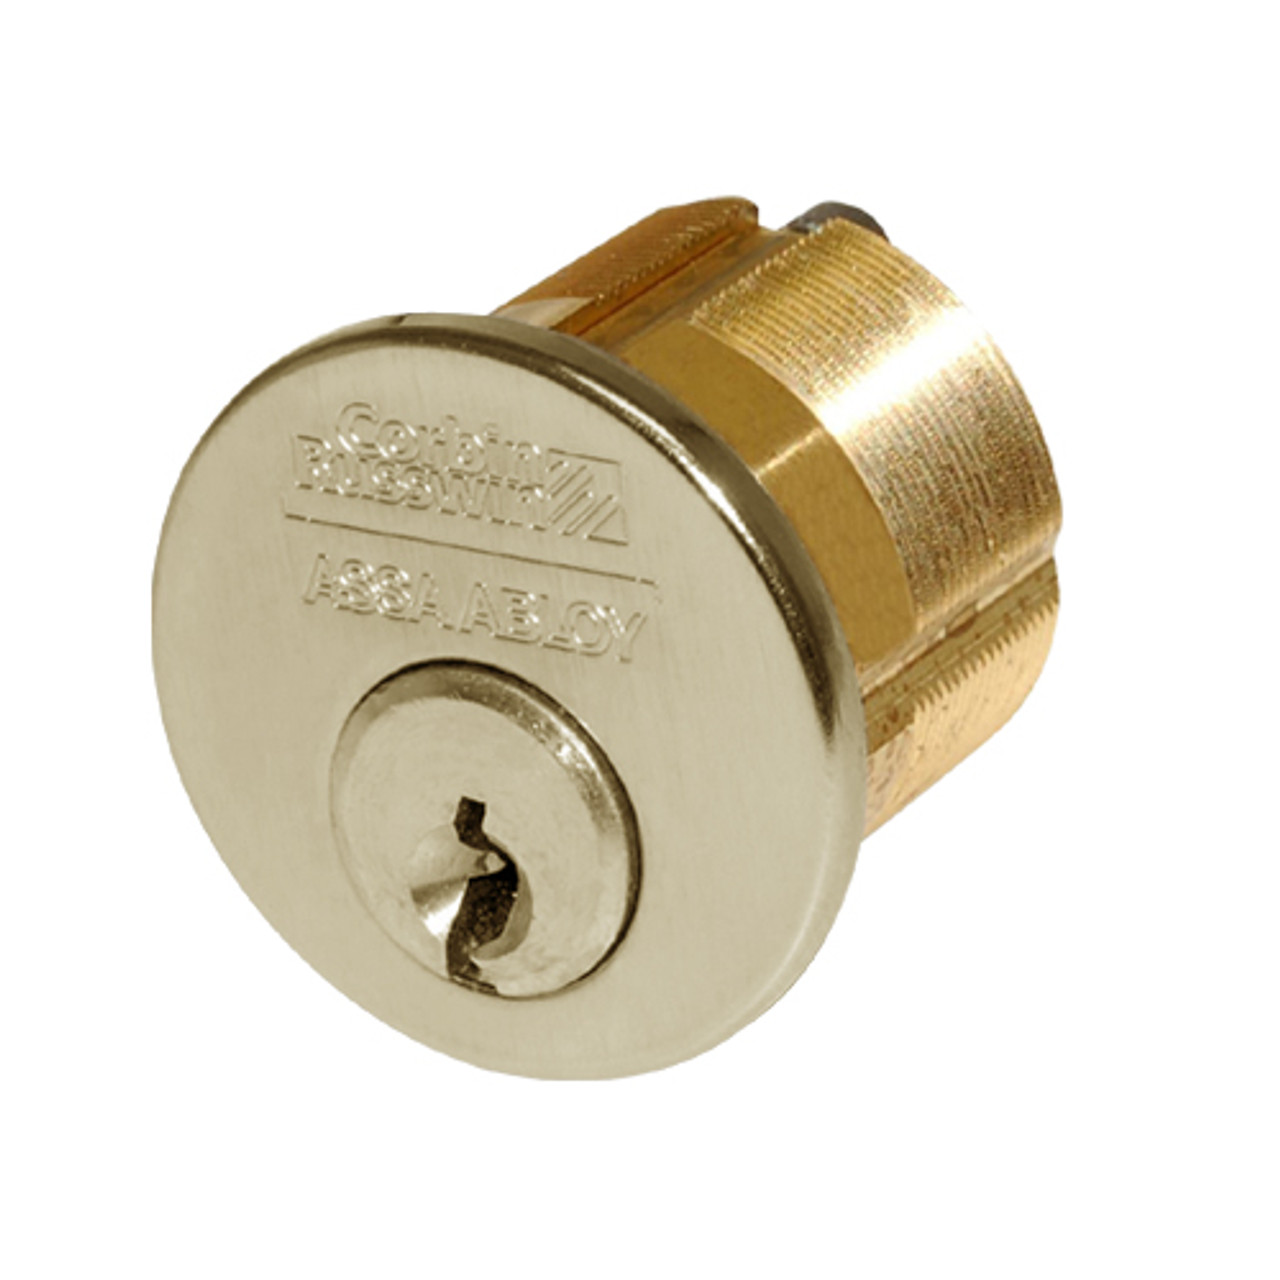 CR1000-200-A06-6-57B1-606 Corbin Conventional Mortise Cylinder for Mortise Lock and DL3000 Deadlocks with Schlage L9000 Cam in Satin Brass Finish